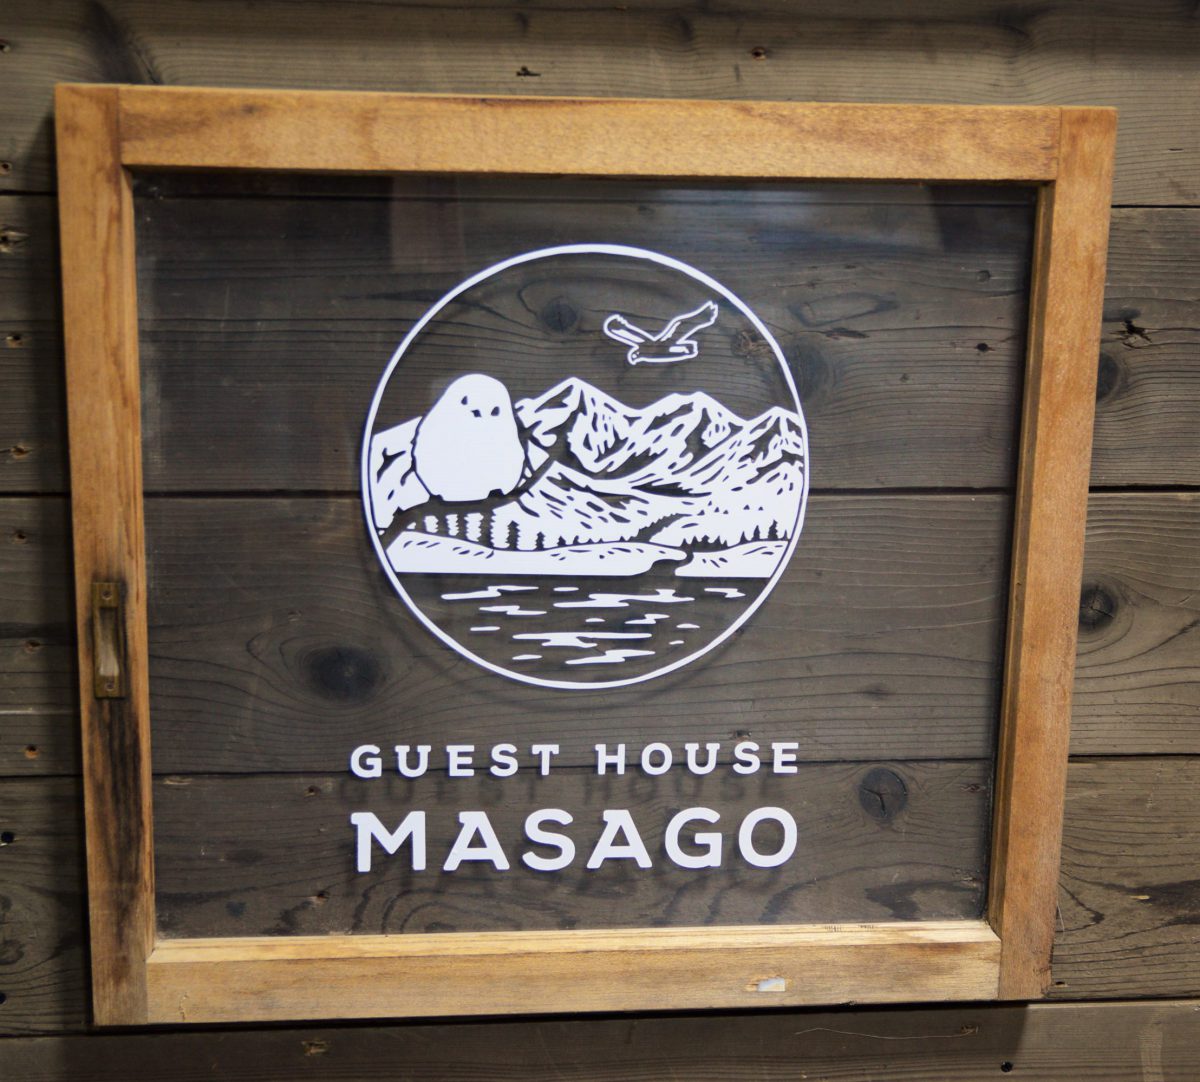 GUEST HOUSE MasagoがOPENしました！